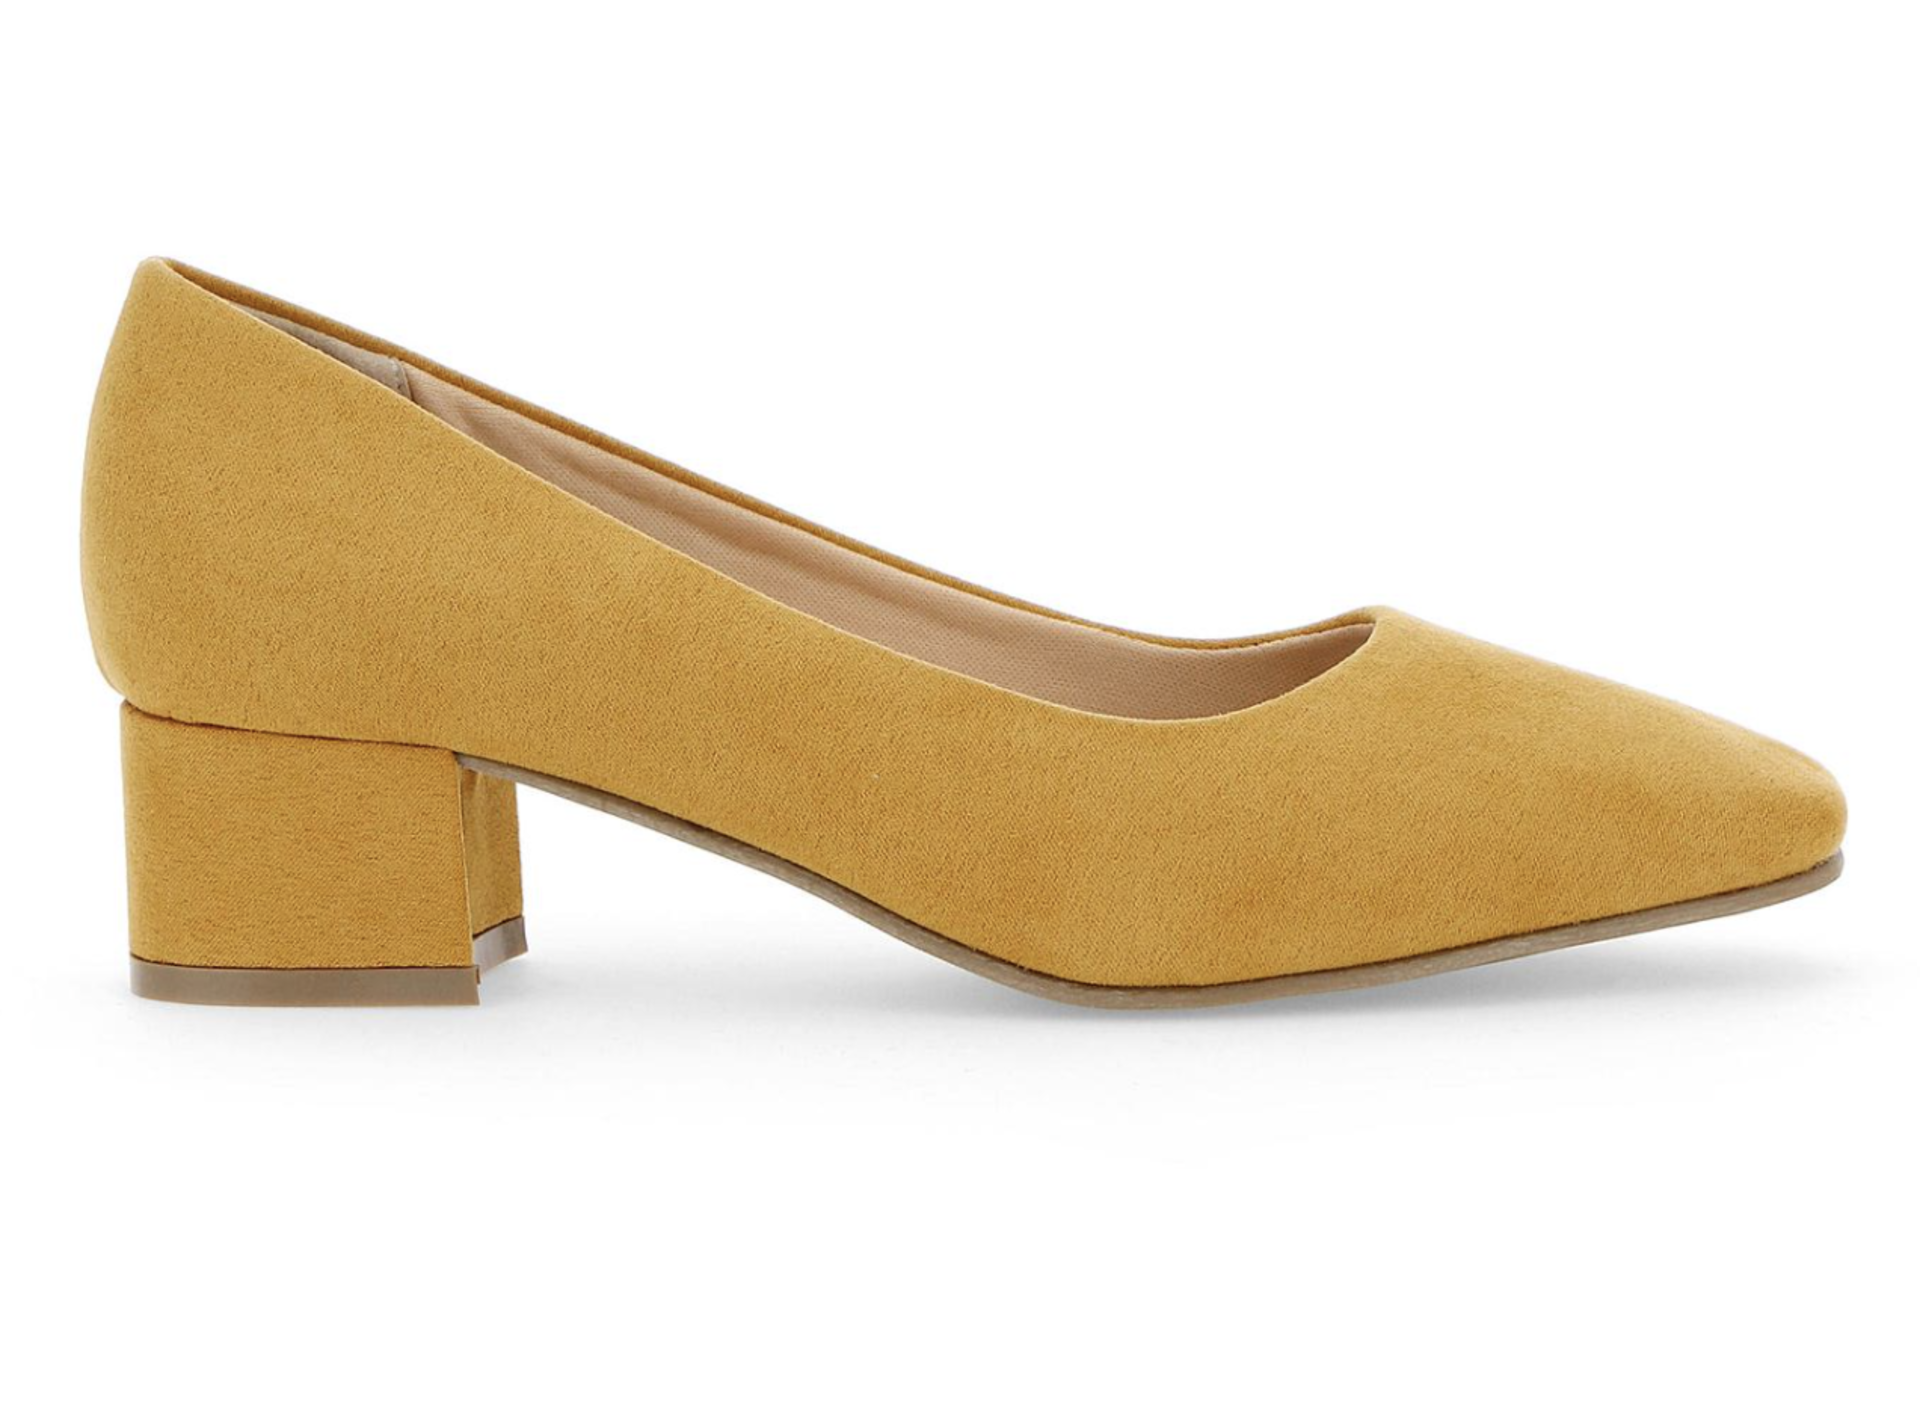 1 X UNBOXED YELLOW SUEDE LOW CHUNKY HEEL COURT SHOE SIZE 5 £35Condition ReportALL ITEMS ARE BRAND